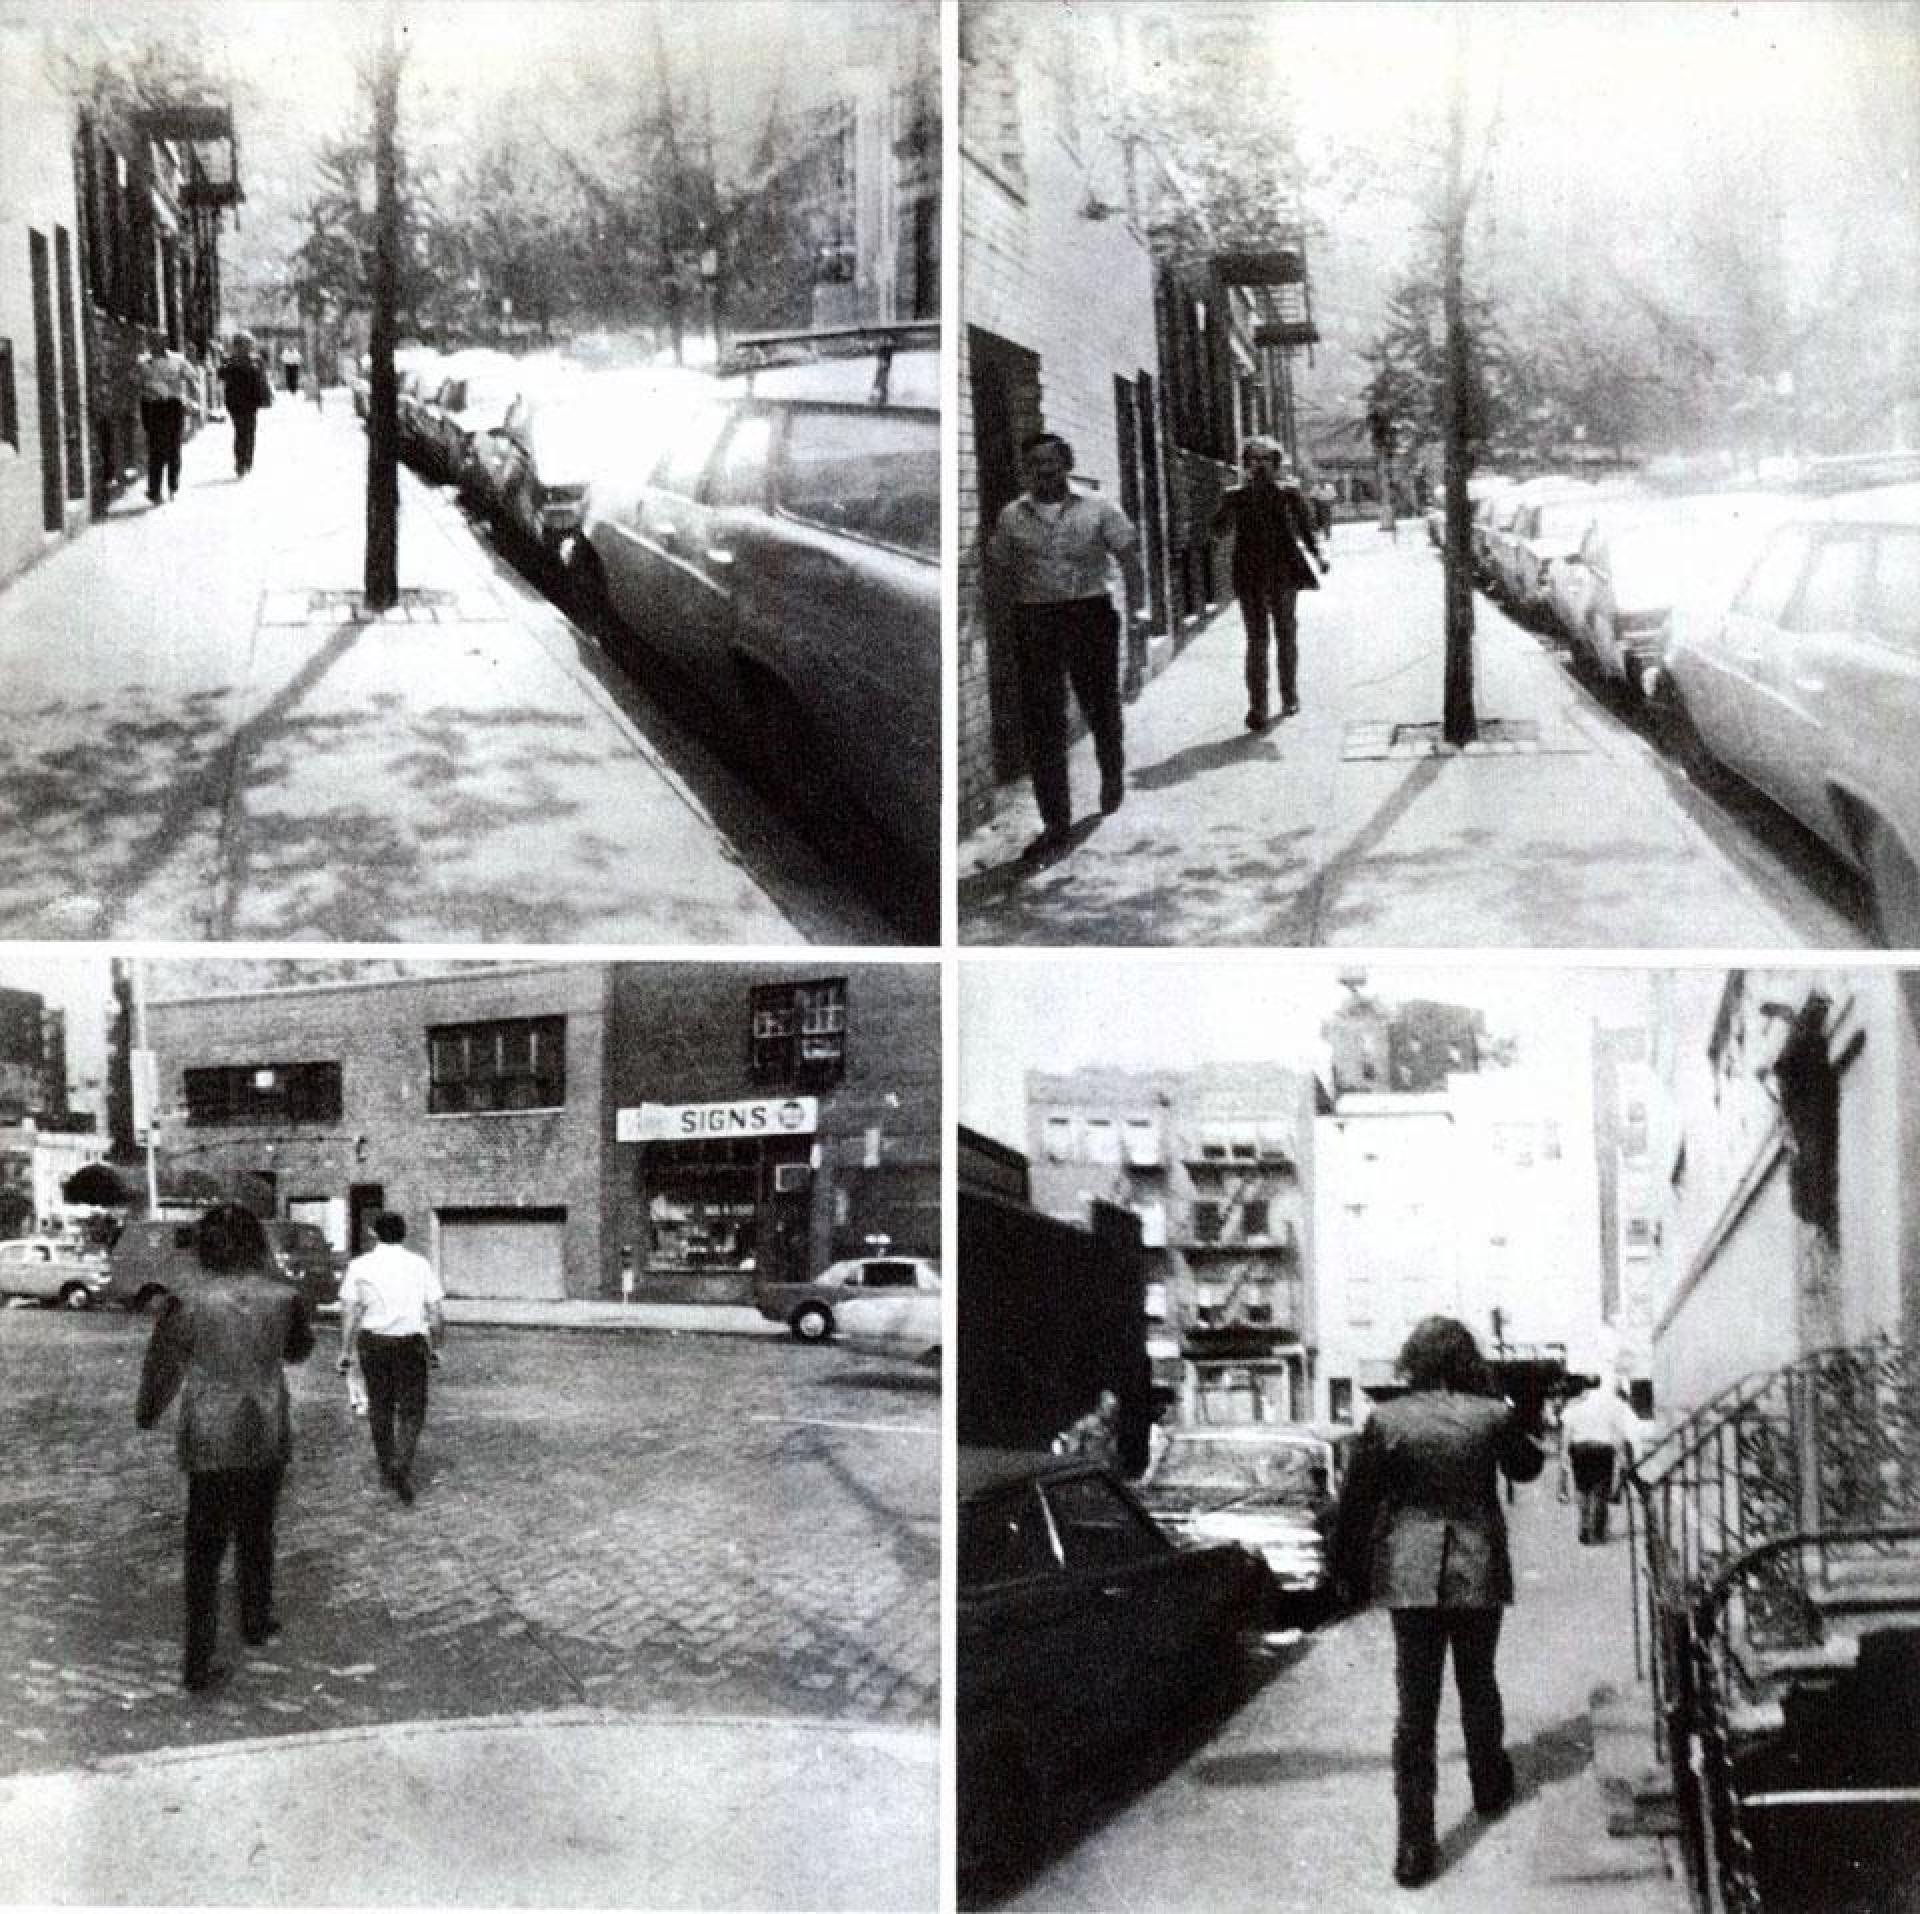 Acconci following an unsuspecting New Yorker, until he can’t, in Following Piece, 1969. | Photo via Artnet